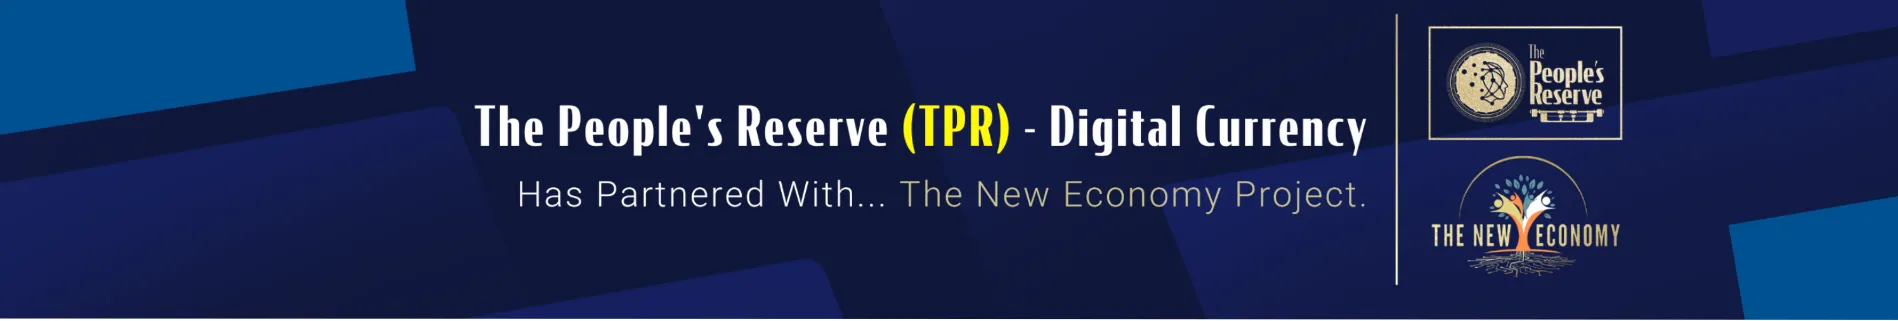 The Peoples Reserve TPR - Digital Currency has partnered with The New Economy Project